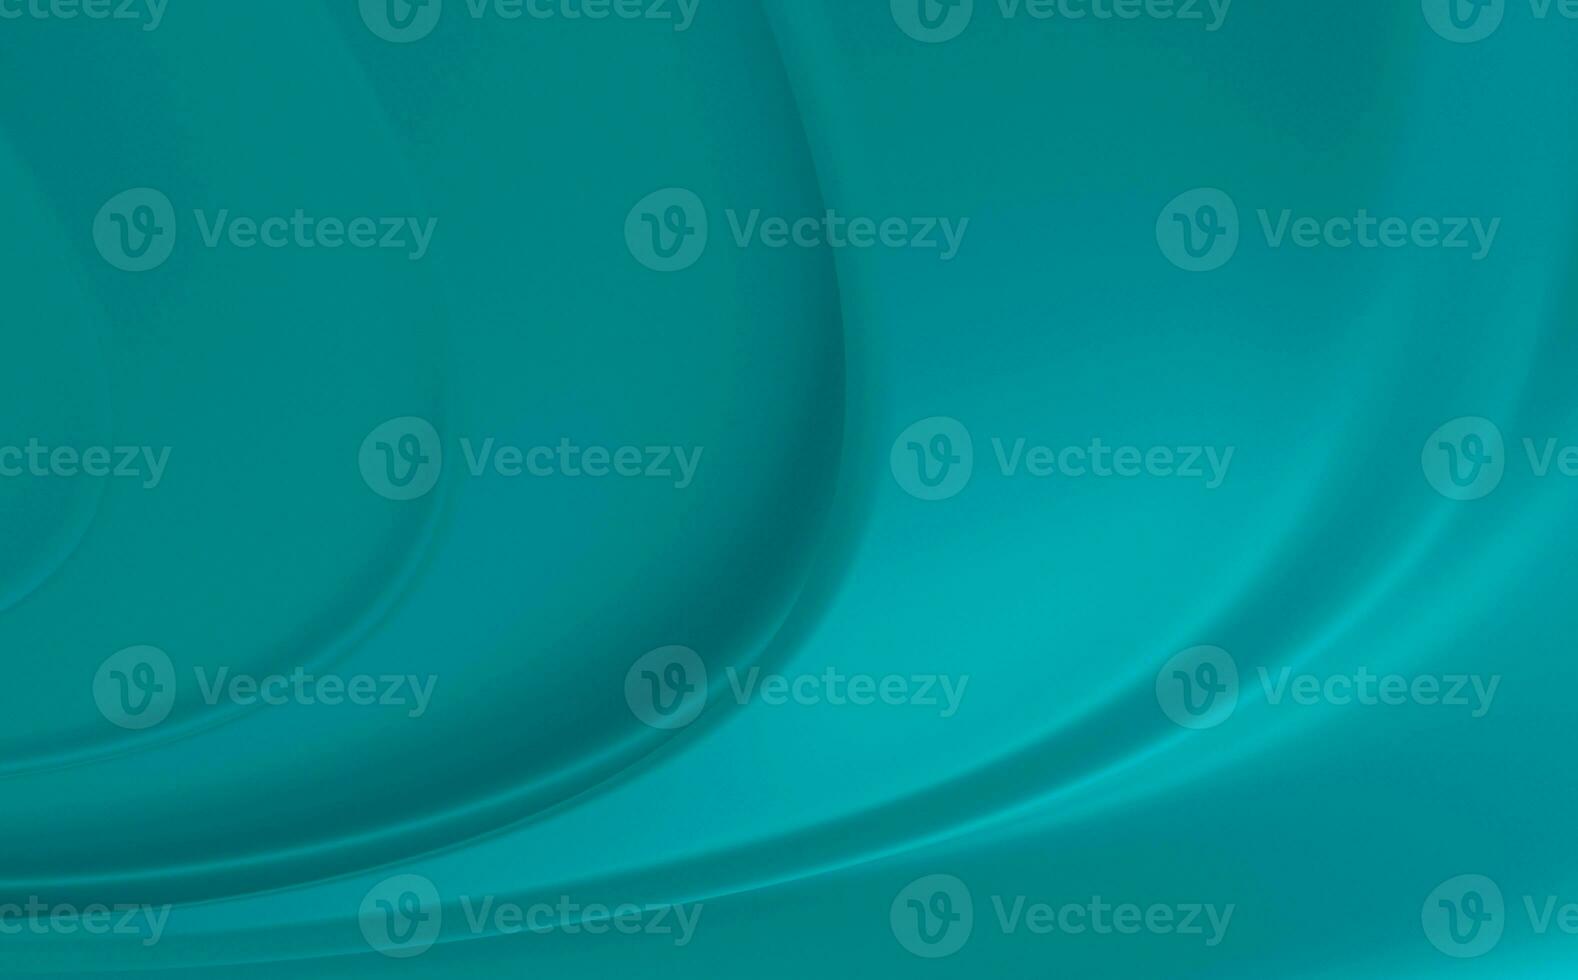 Abstract Gradient aqua teal background photo